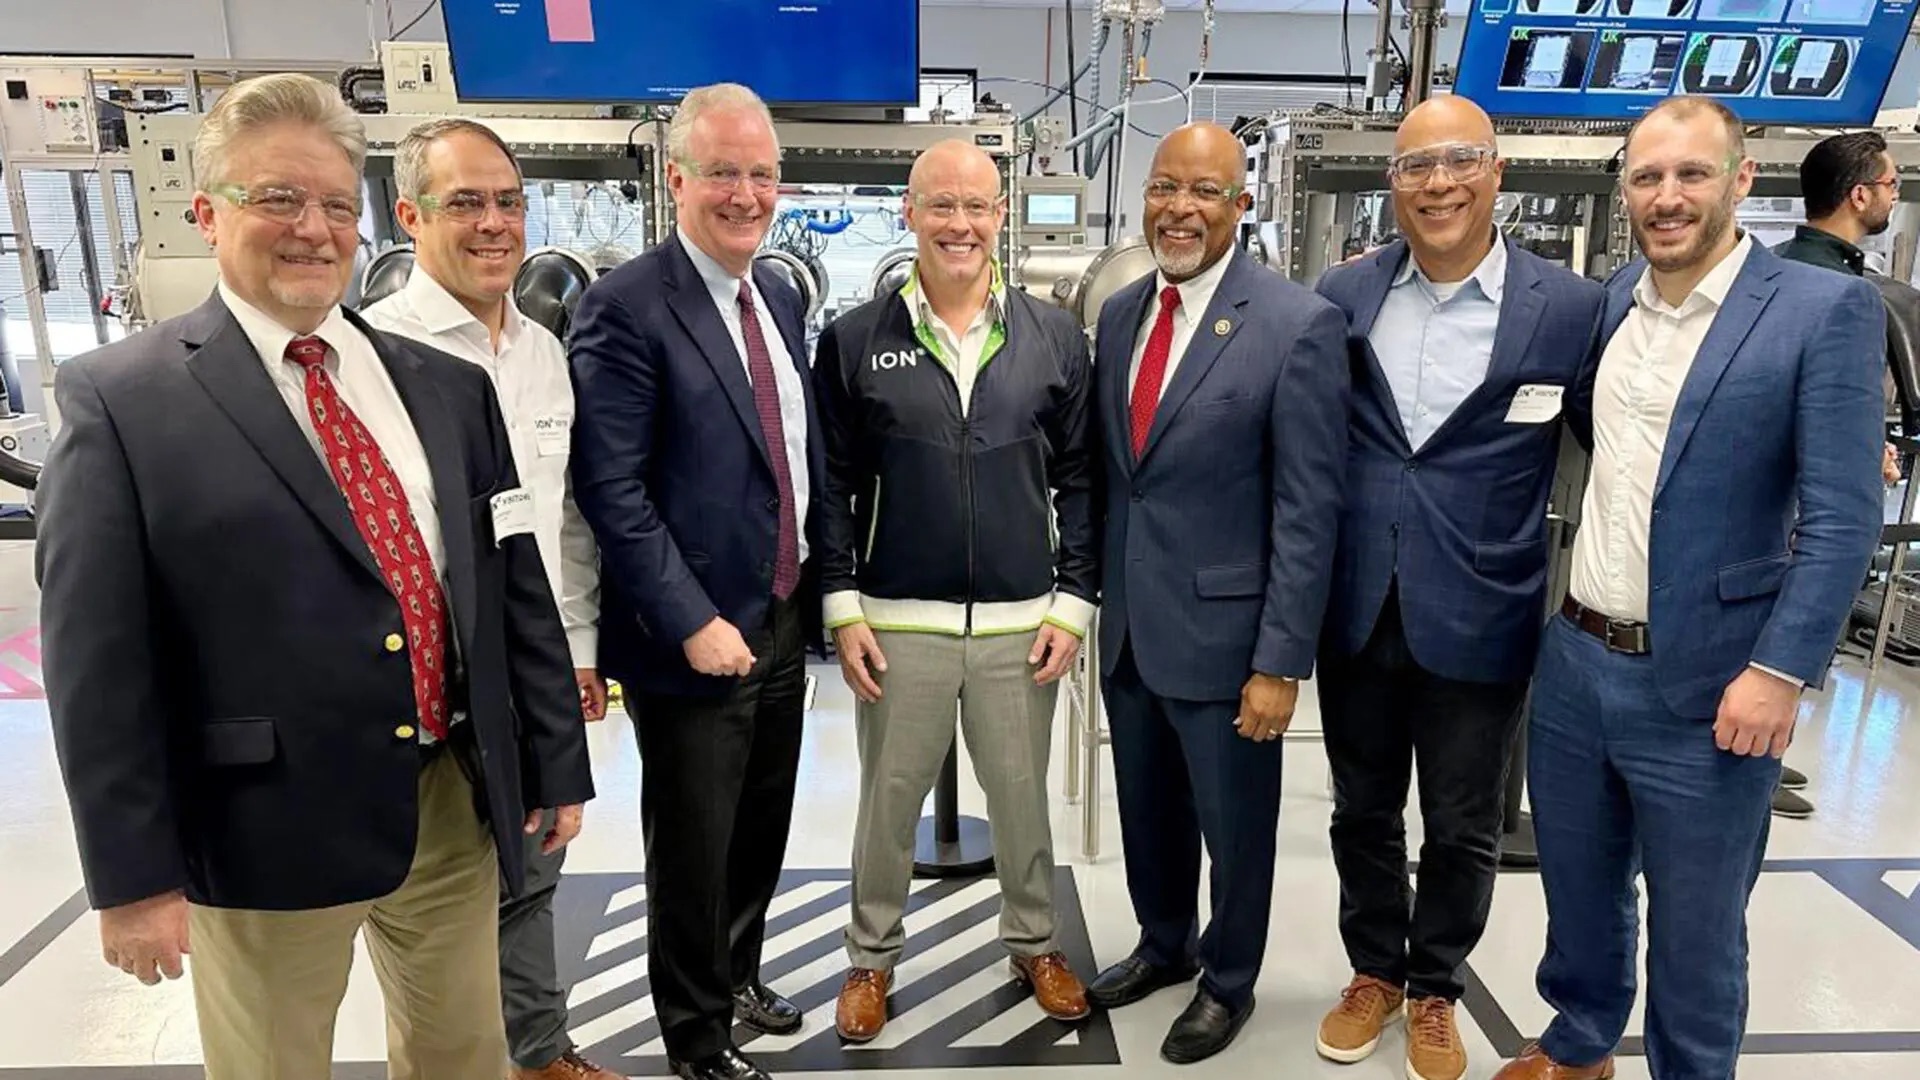 From left: Ion Storage Systems founder and Executive Chair Eric Wachsman, Todd Crescenzo of Clear Creek Investments, U.S. Sen. Chris Van Hollen, Ion Storage Systems CEO Ricky Hanna, U.S. Rep. Glenn Ivey, Mark Fields of Alsop Louie, Ion Storage Systems founder and Chief Technology Officer Greg Hitz